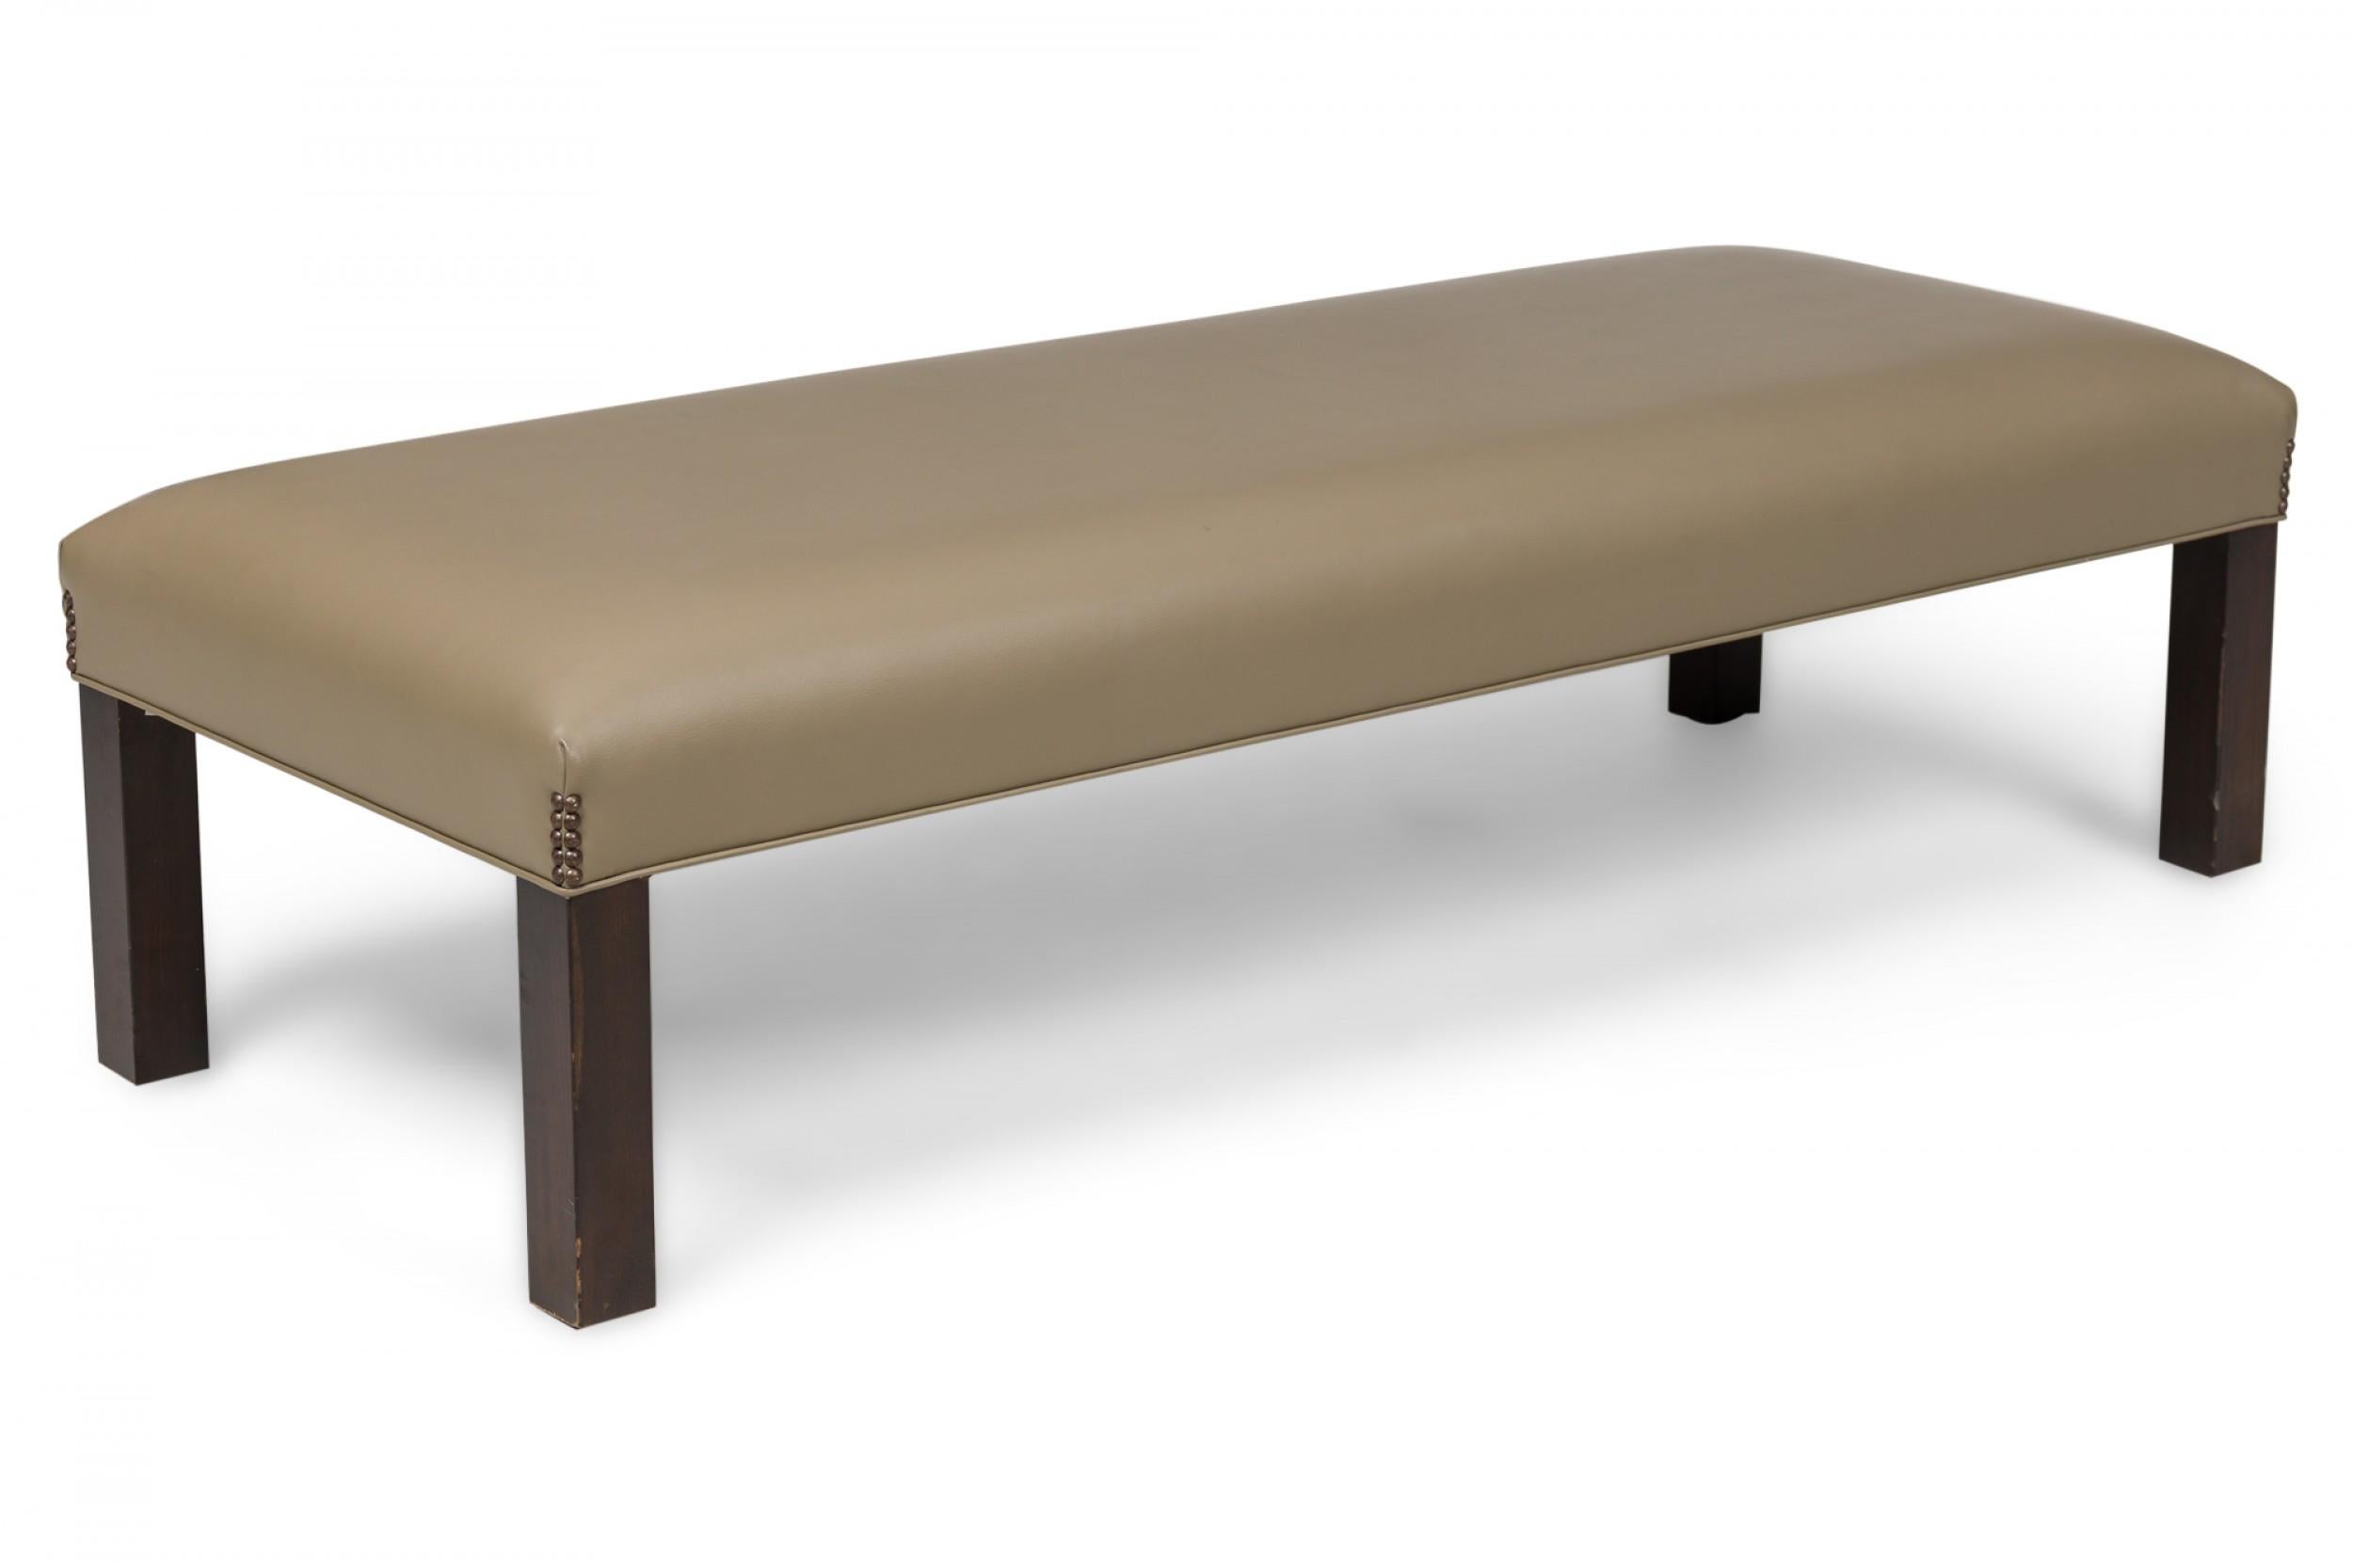 Pair of Contemporary Taupe Leather Upholstered Benches In Good Condition For Sale In New York, NY